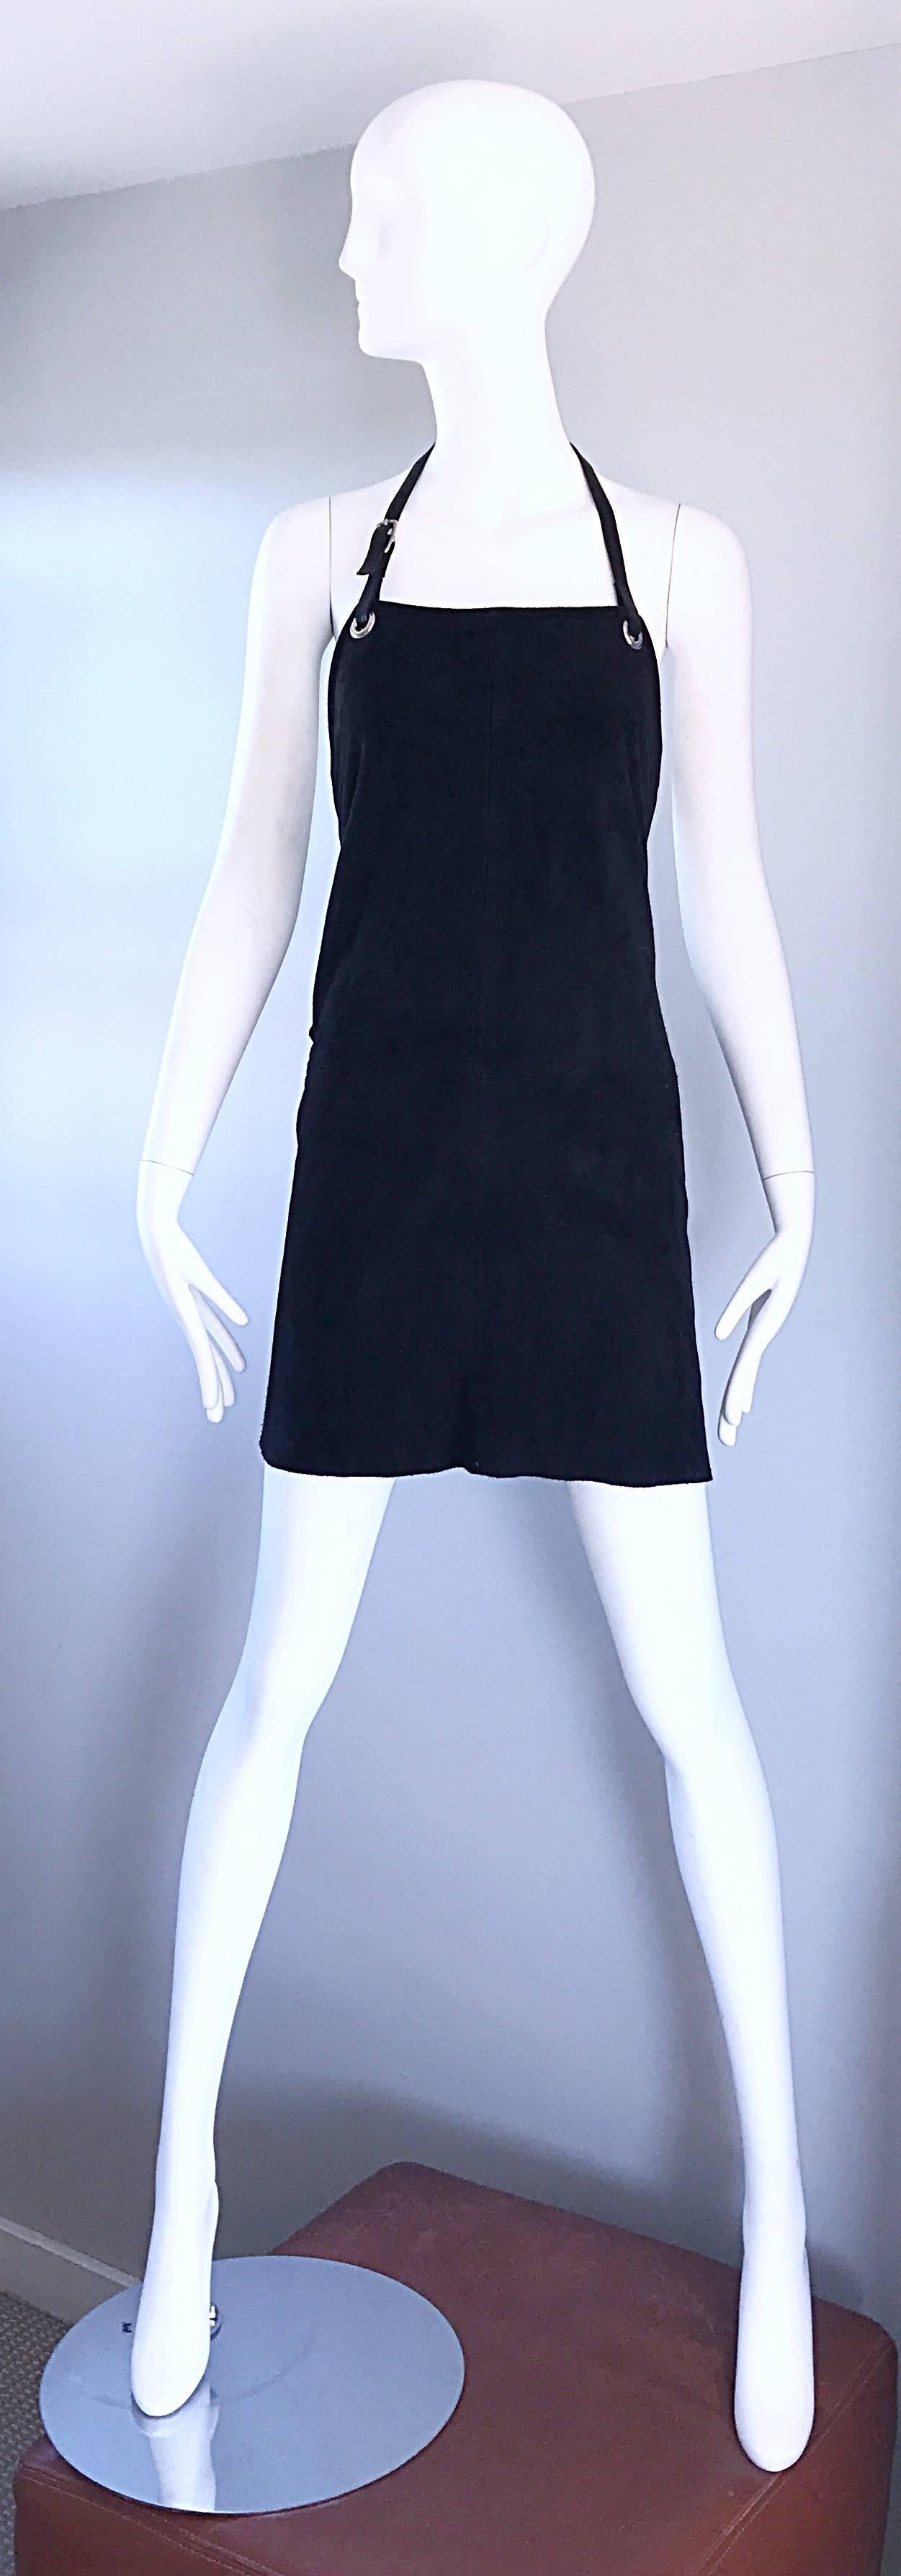 Super rare early HELMUT LANG black suede leather apron style dress! Adjustable black leather buckle strap can accomodate an array of sizes. Chic fit looks great on a number of sizes. In great unworn condition. Made in Italy.
Approximately Size